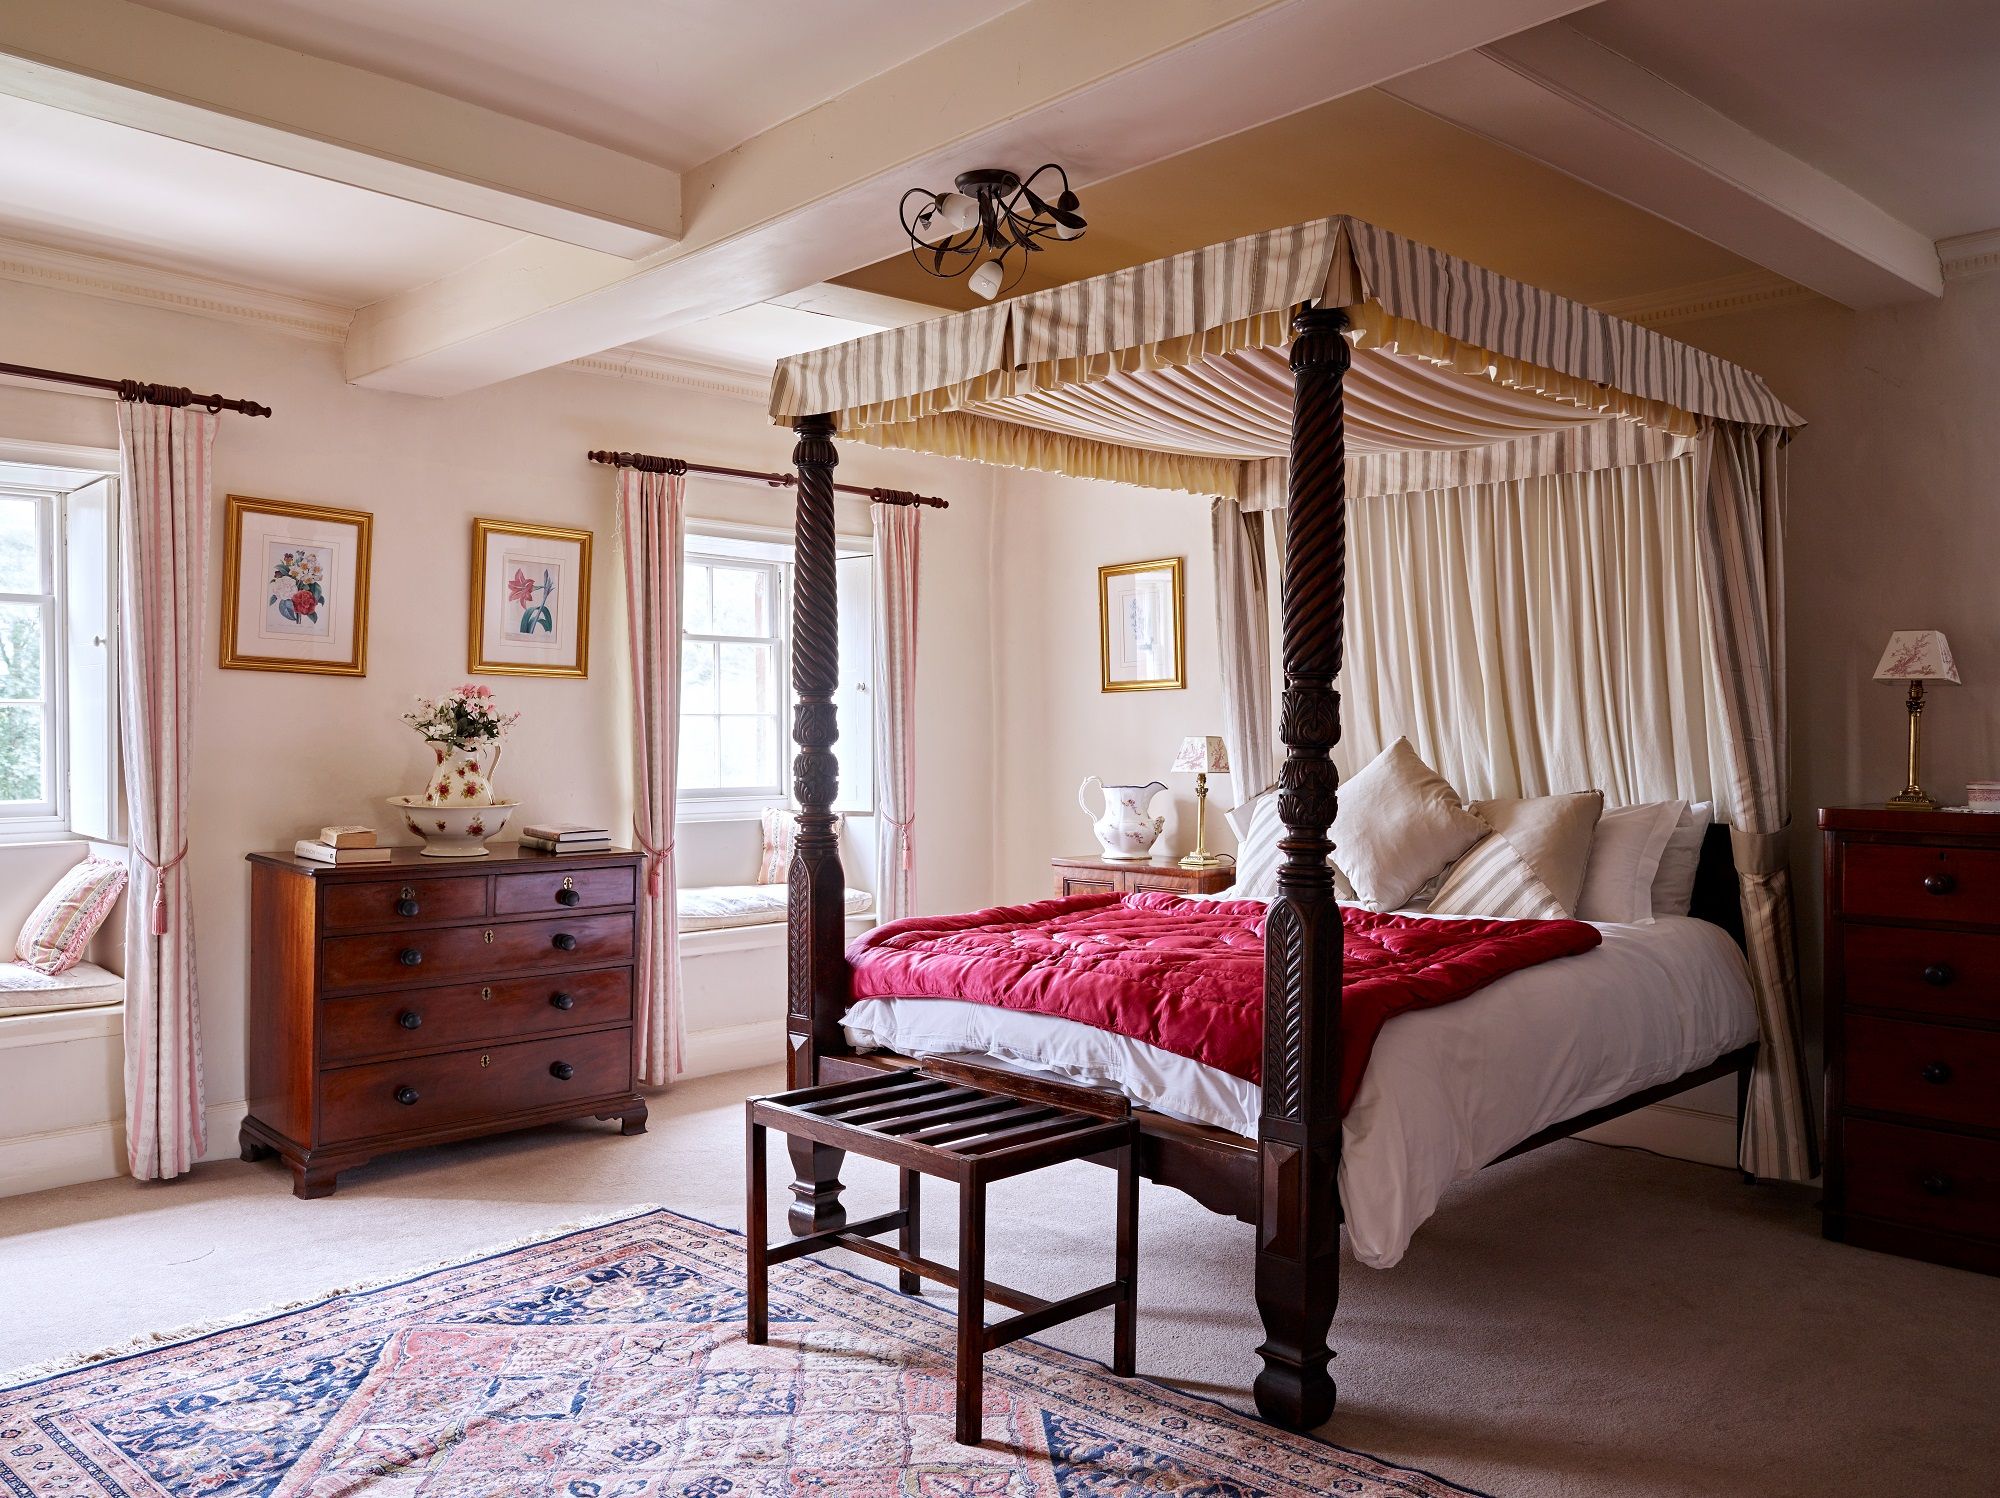 Melmerby Hall Victorian ensuite bedroom with cast iron bath luxury self catering holiday cottage for family holidays weddings corporate breaks near Lake District National Park at The Rowley Estates